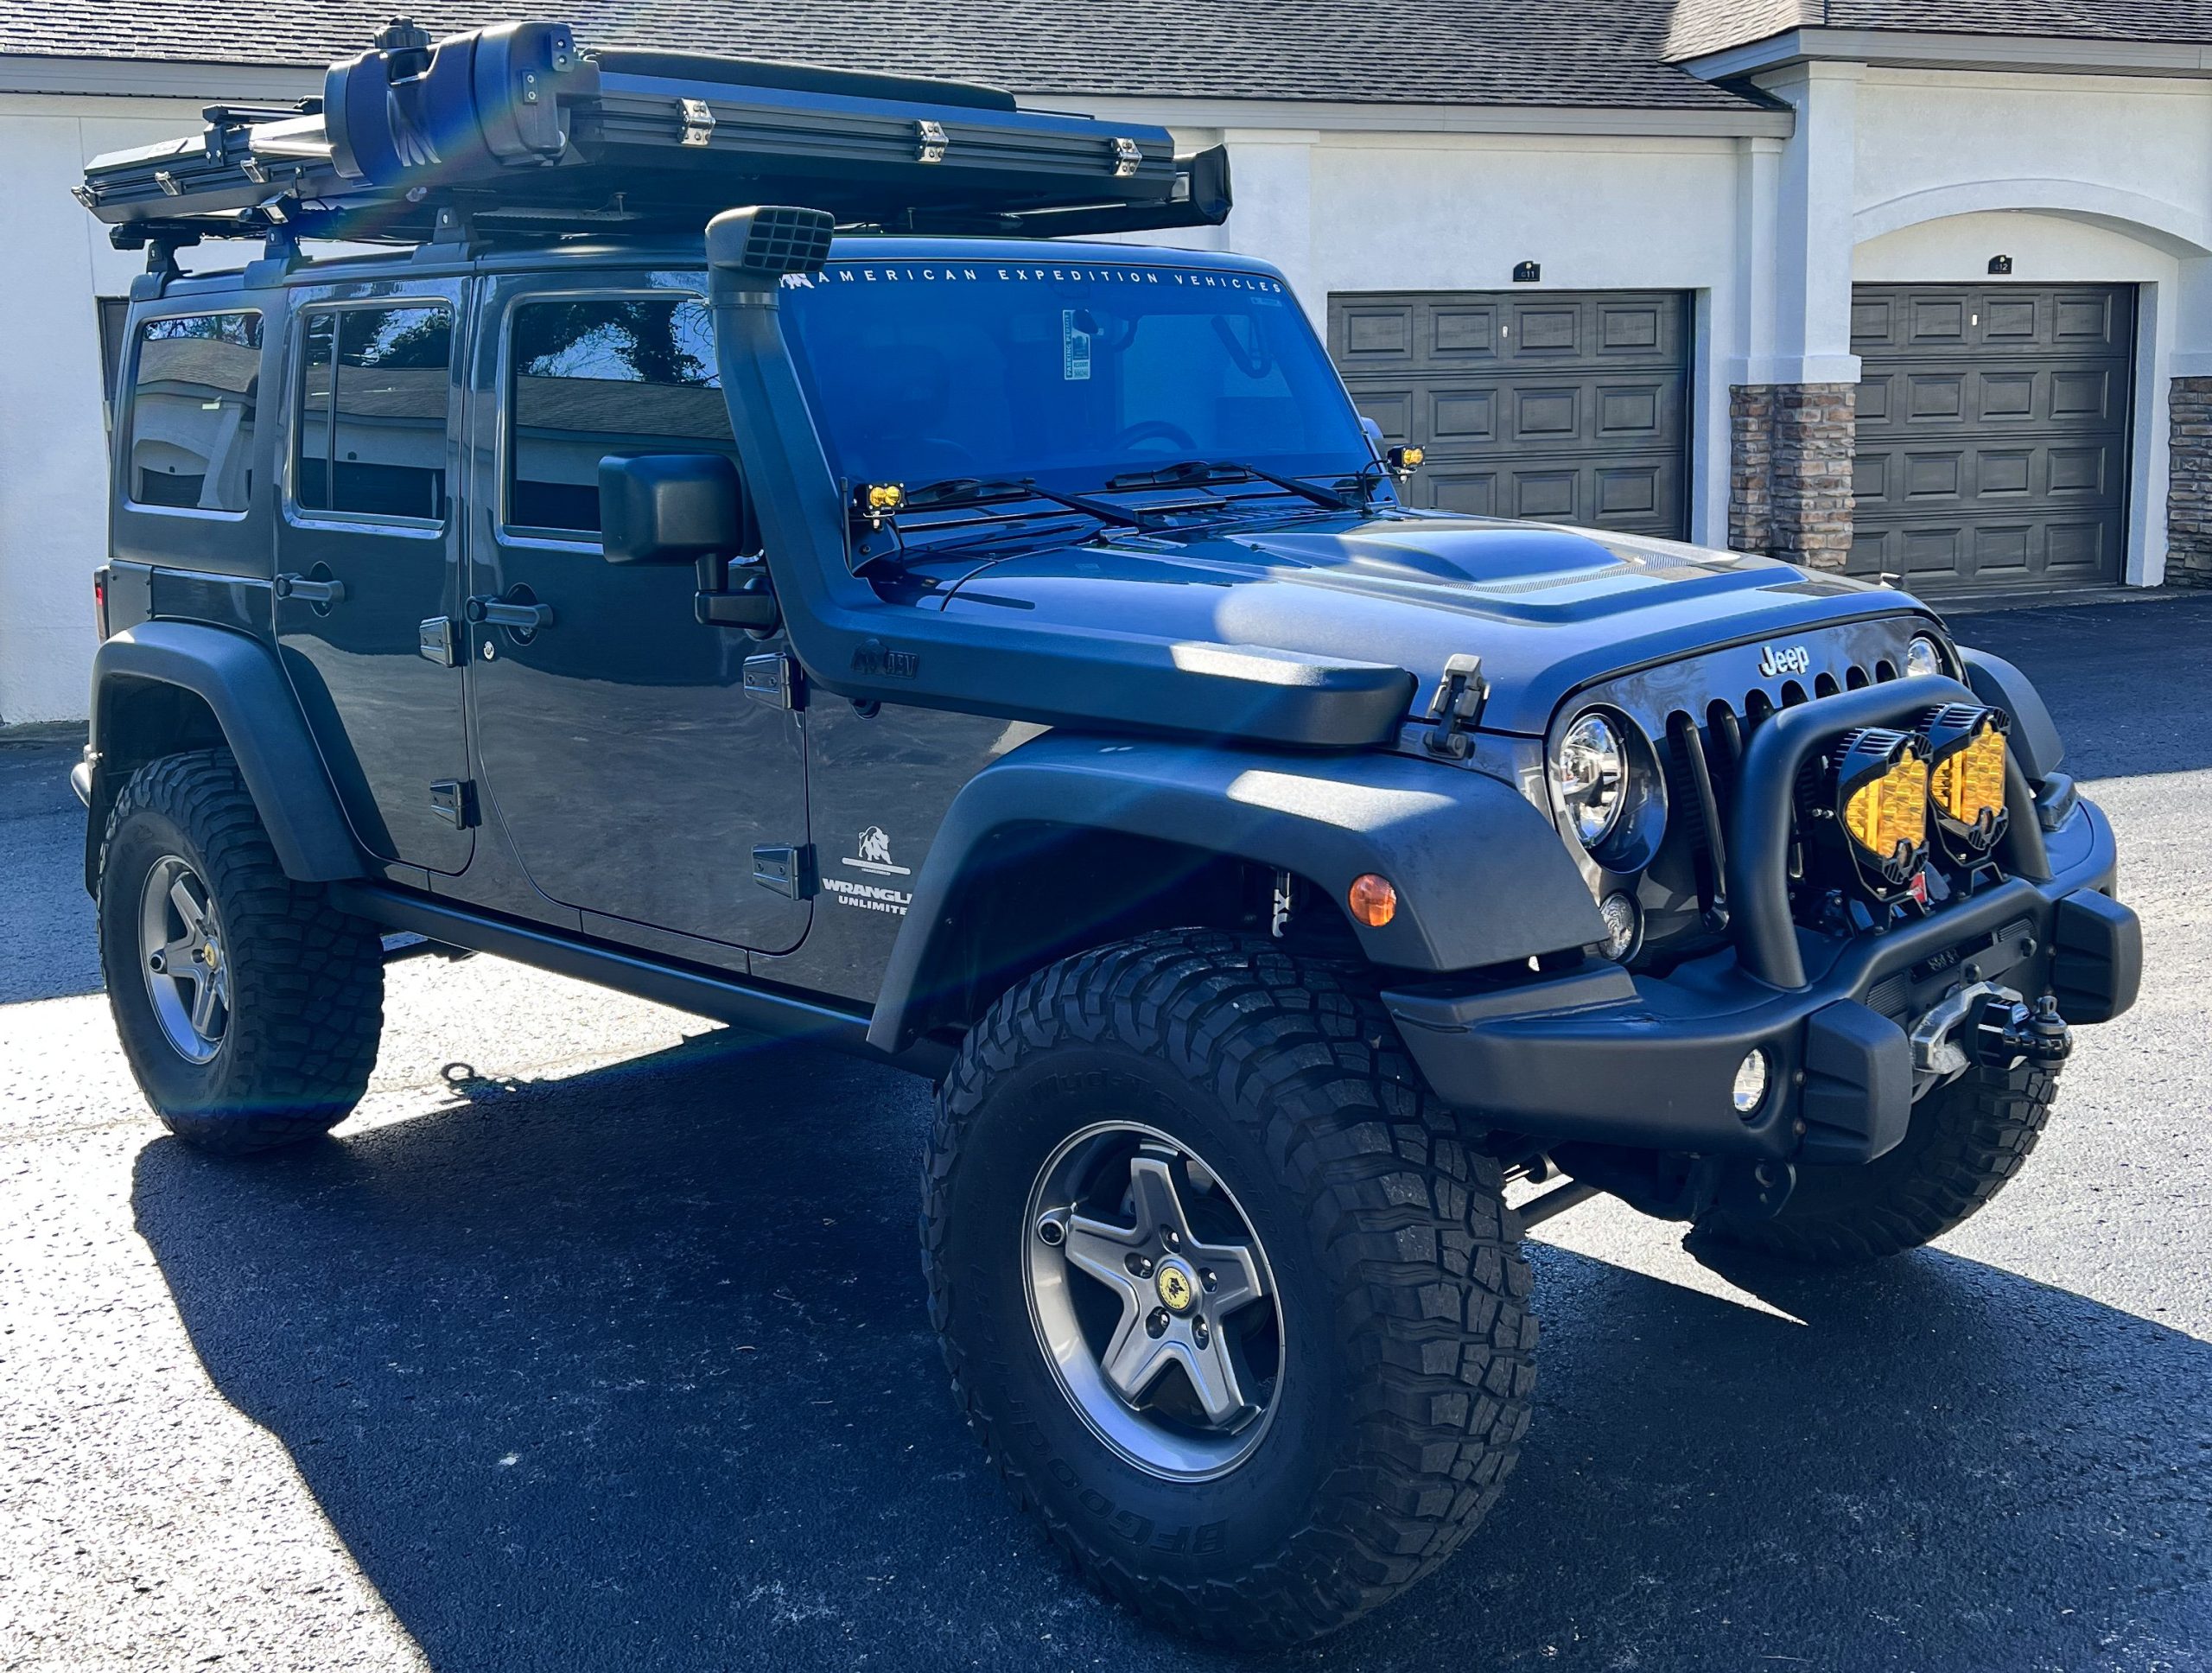 Overland Classifieds :: 2014 Jeep Wrangler AEV Build w/ Overland Extras -  Expedition Portal